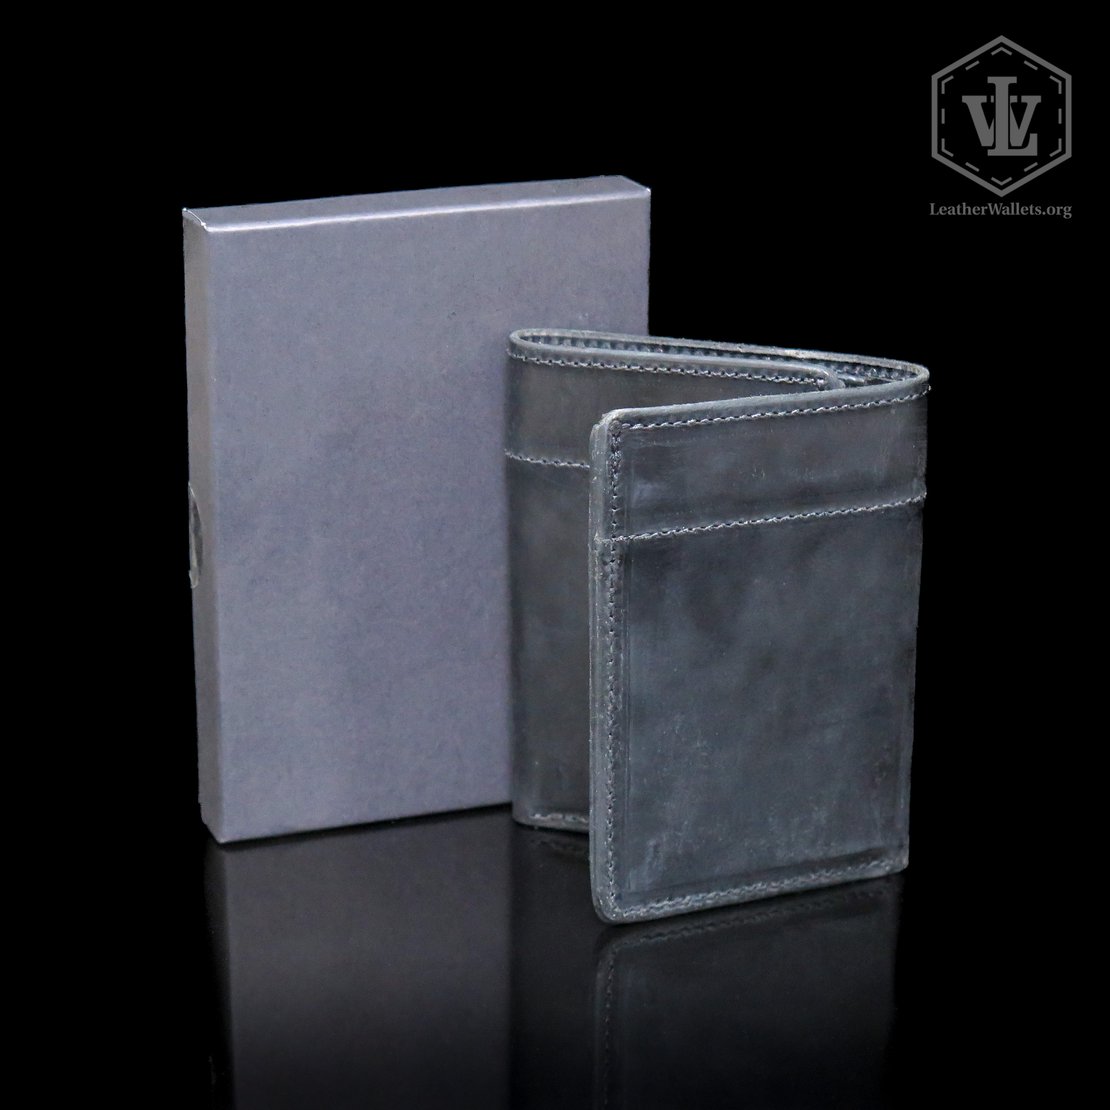  STAY FINE Top Grain Leather Trifold Wallet for Men, RFID  Blocking, Ultra Strong Stitching, Extra Capacity Trifold Wallet